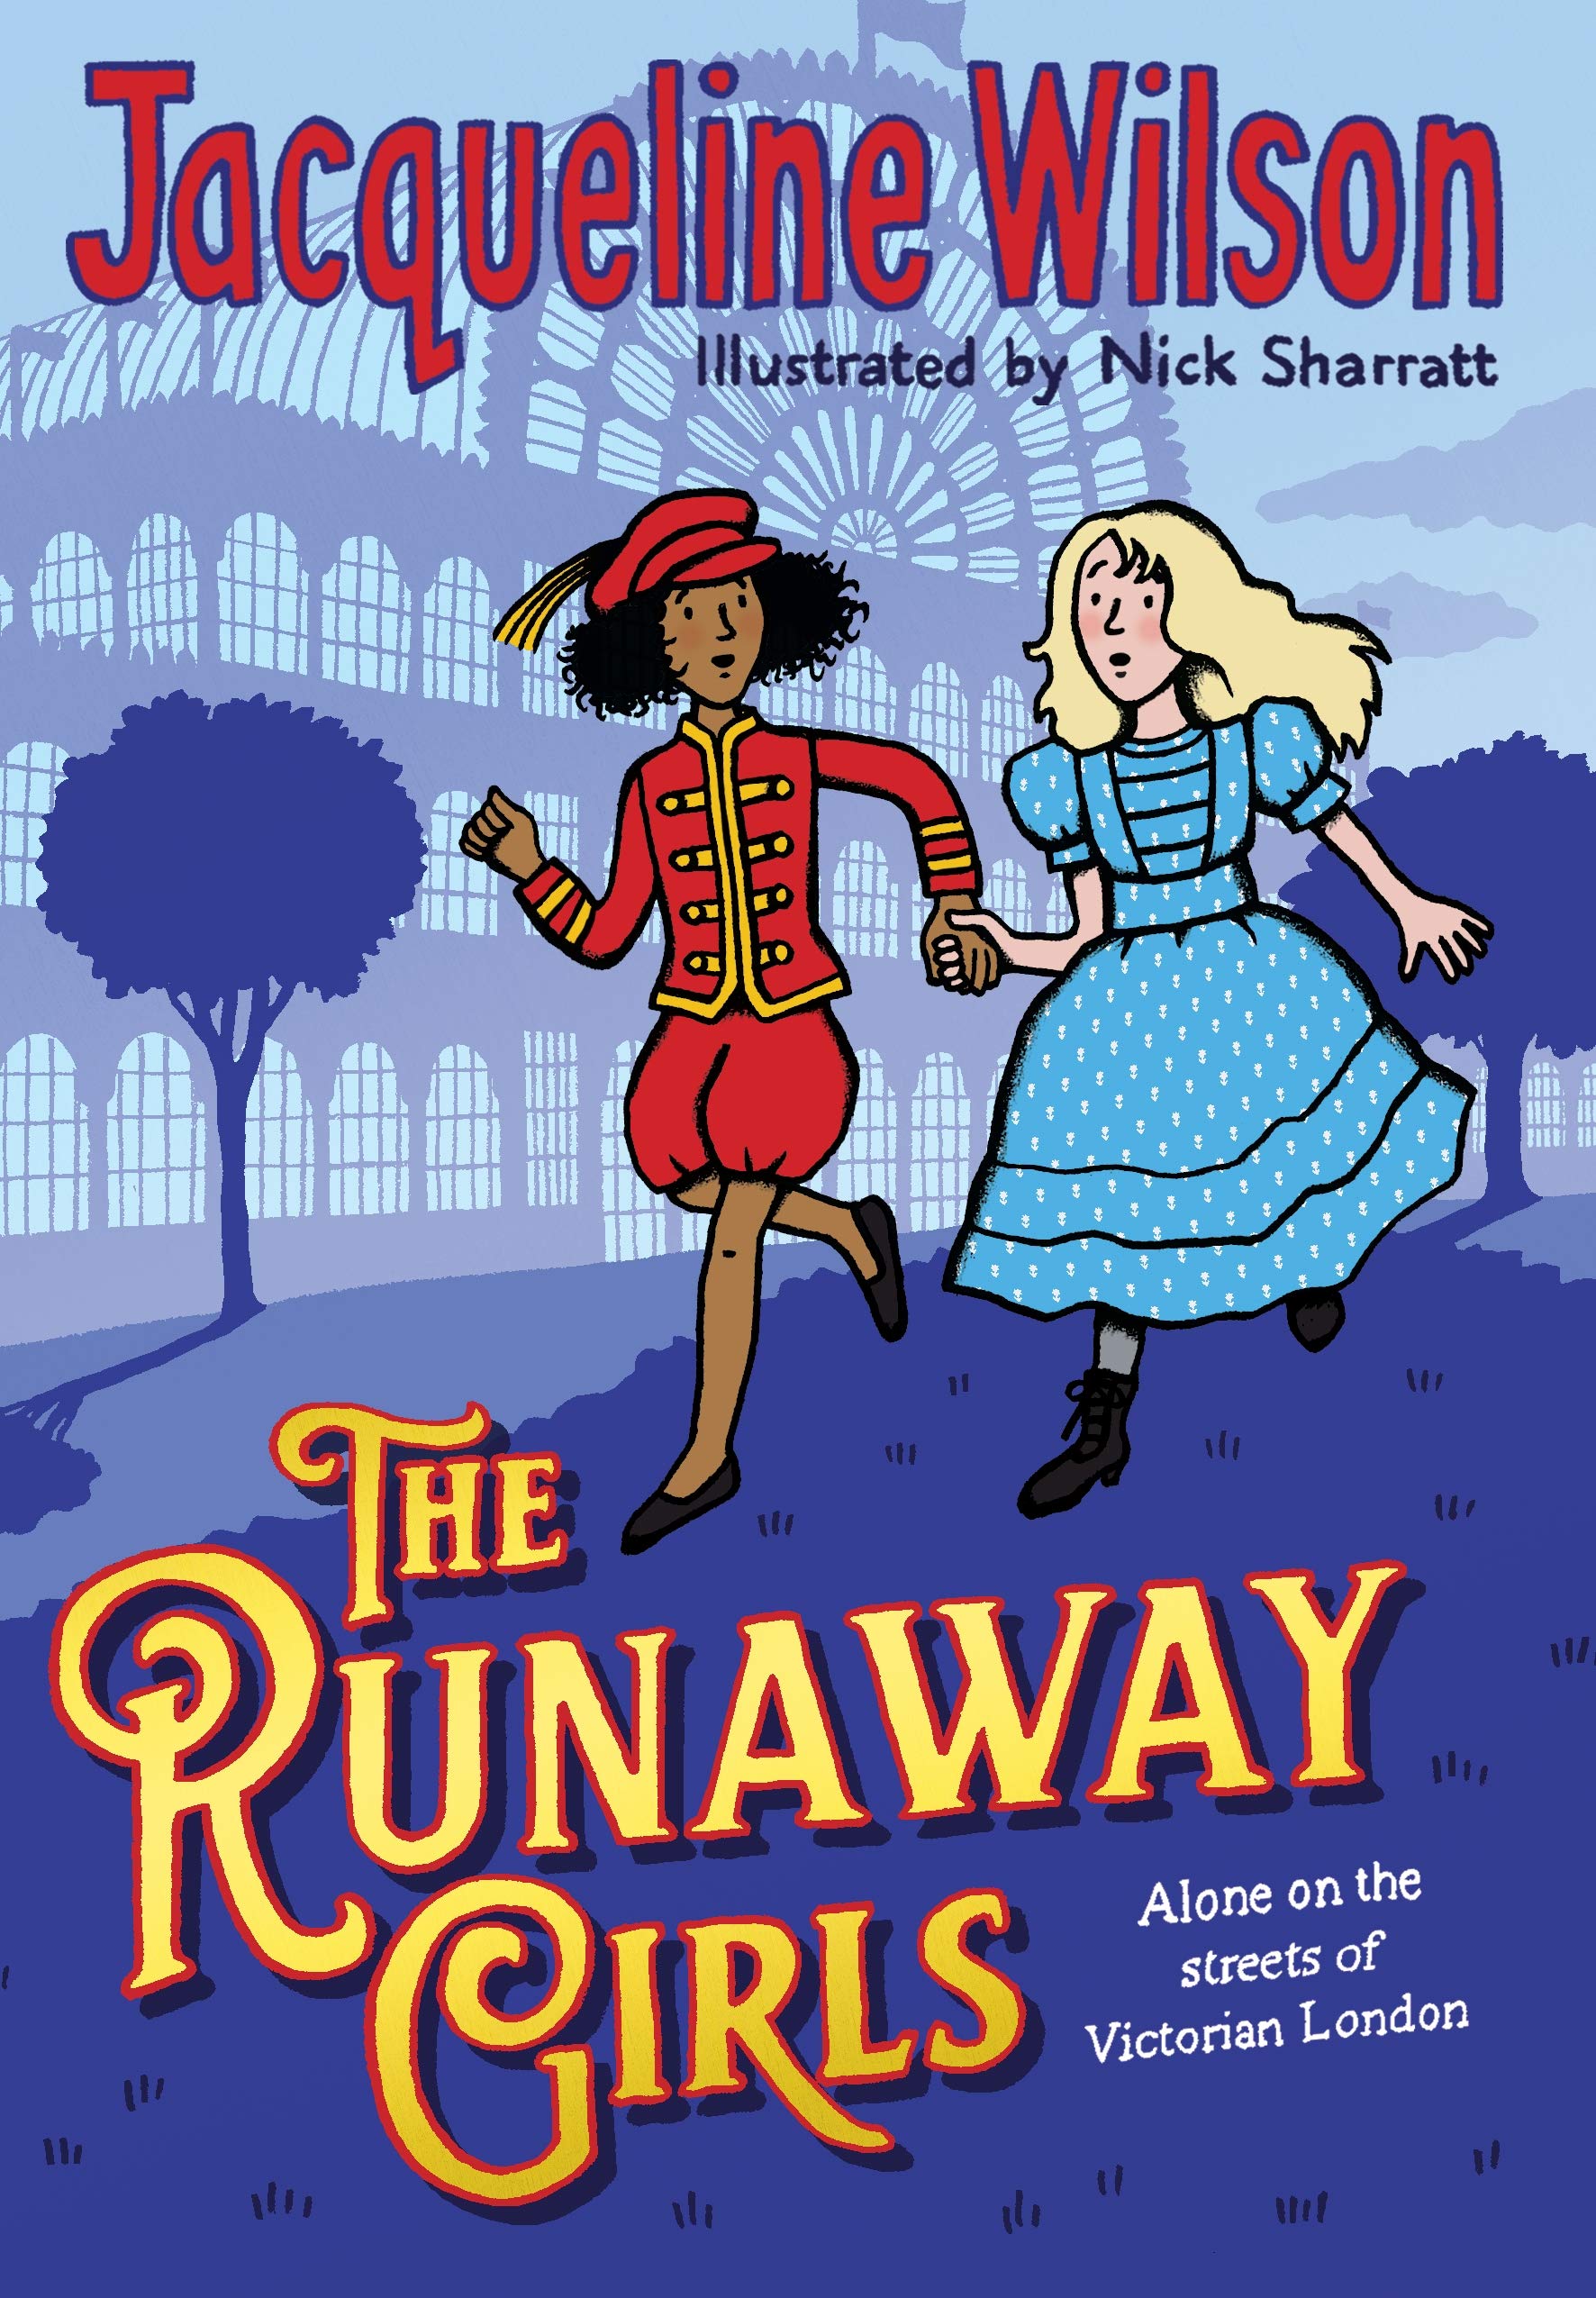 Book Review: The Runaway Girls